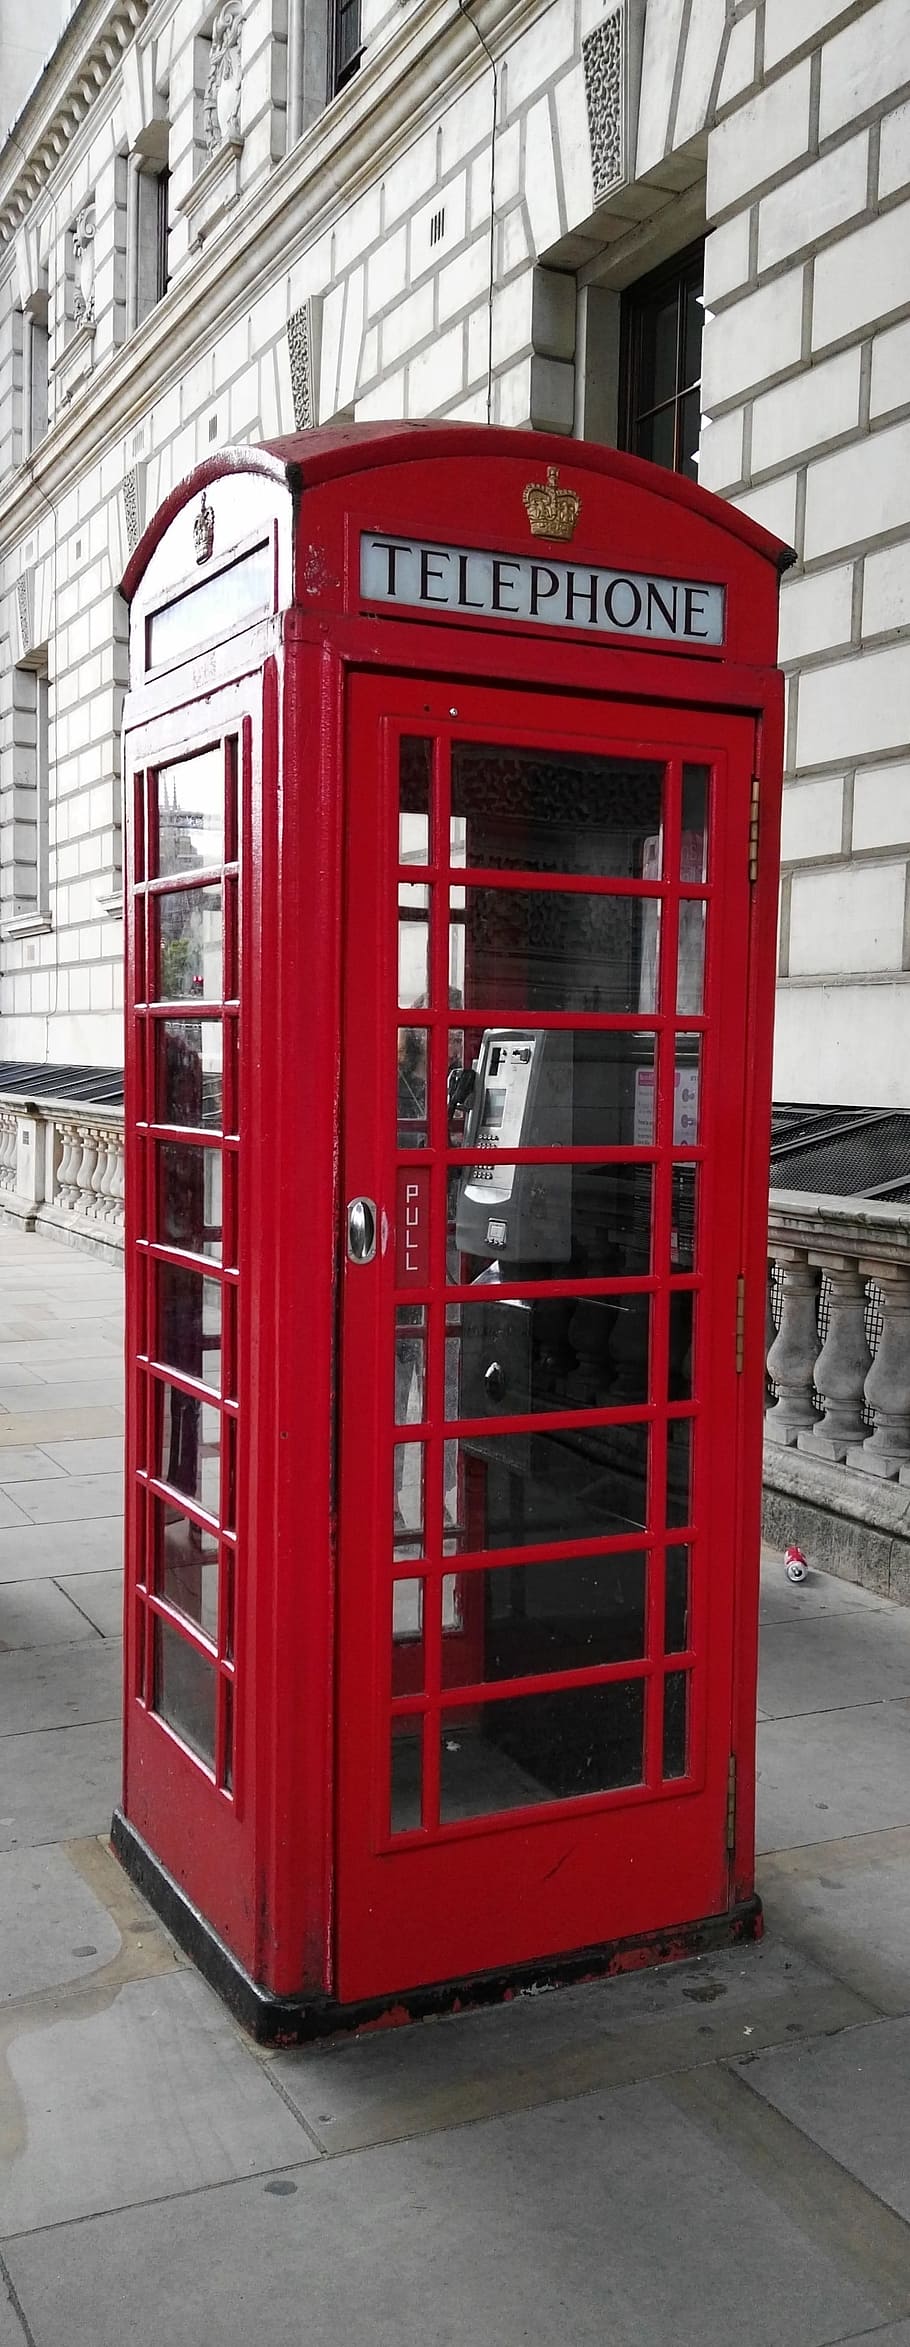 london, phone box, great britain, red cabin, phone, telephone booth, telephone, red, architecture, built structure